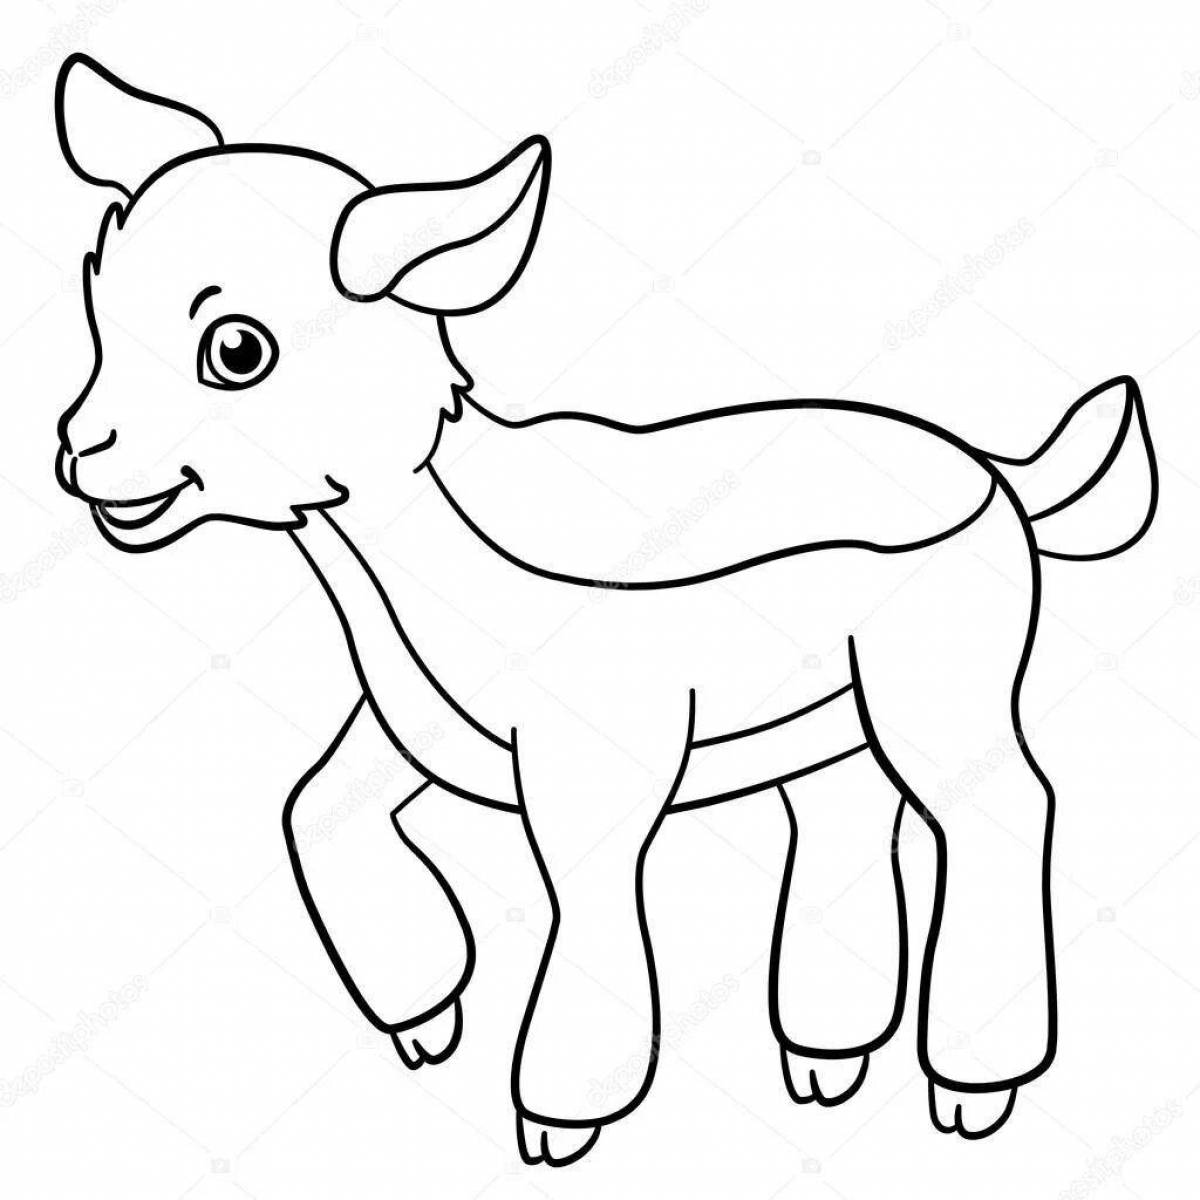 Exciting goat coloring book for kids